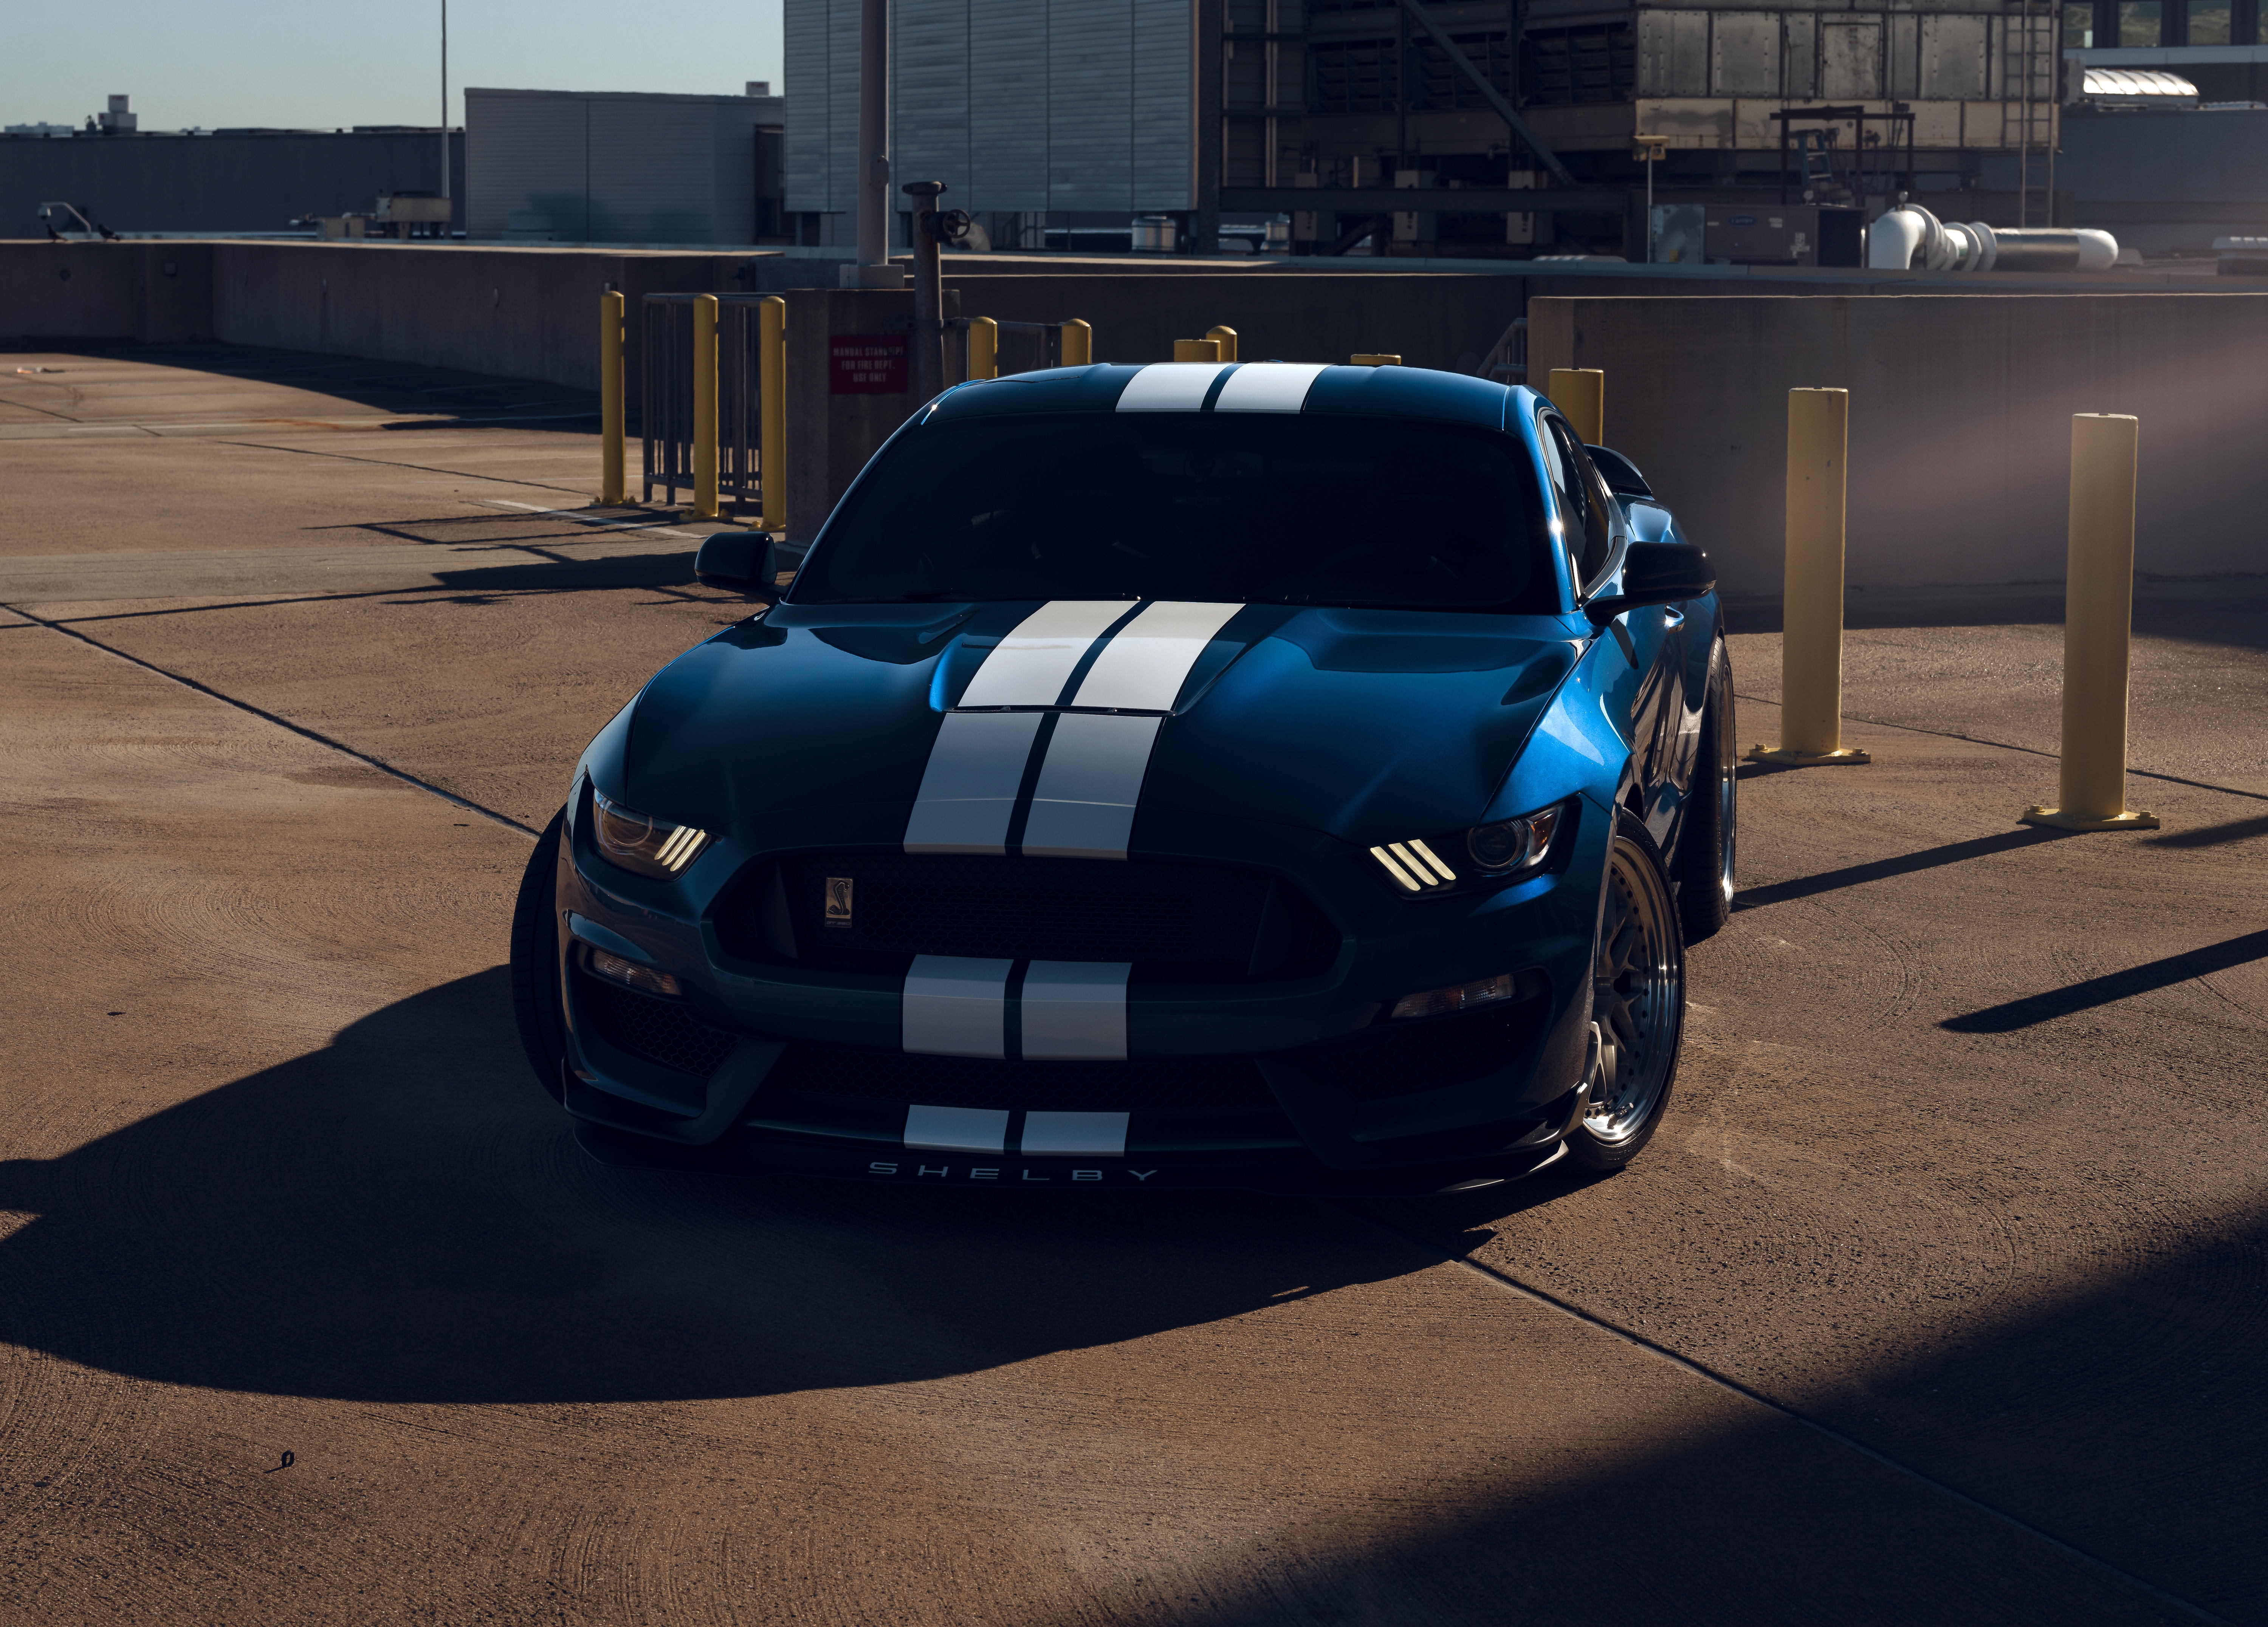 HD wallpaper, Muscle Cars, Ford Mustang Shelby Gt350, 5K